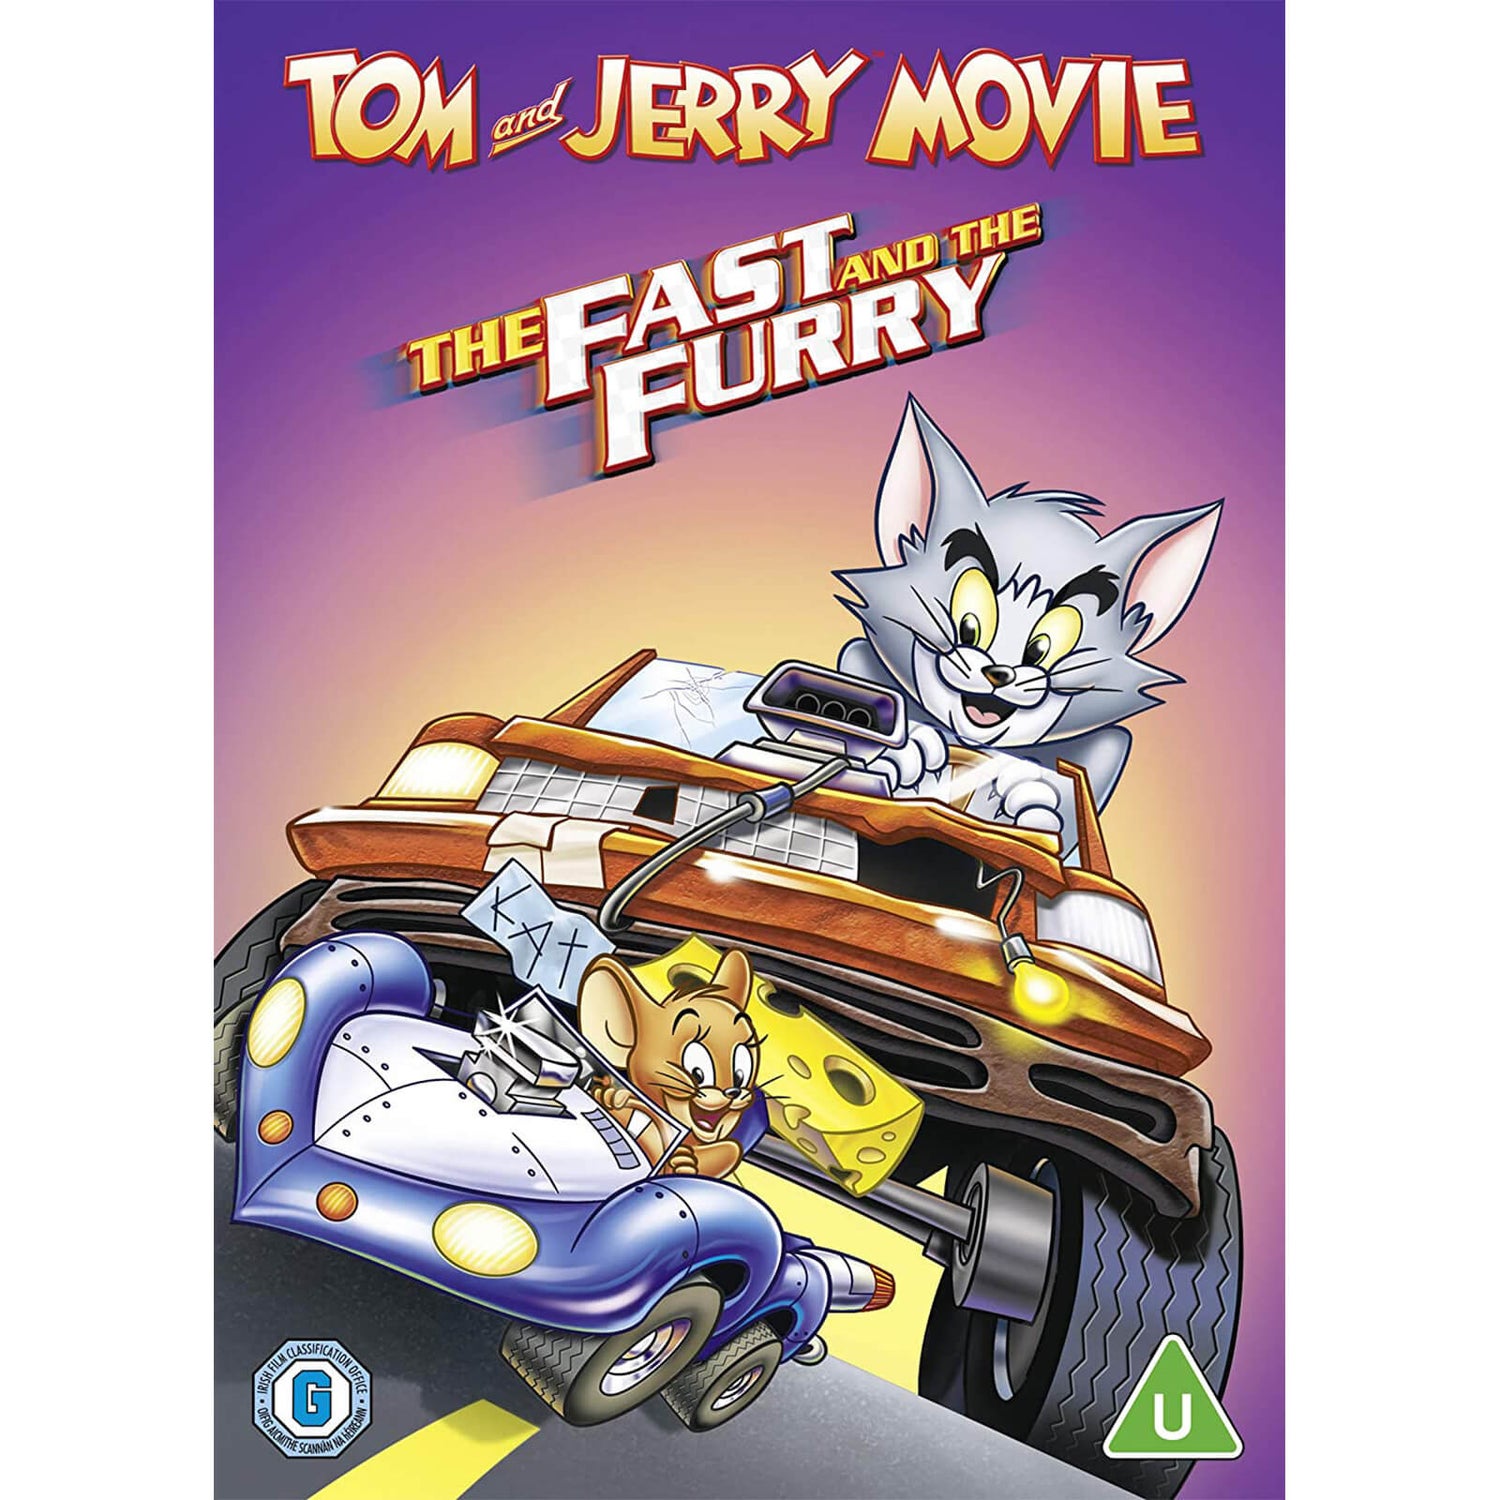 Tom & Jerry: Fast And The Furry